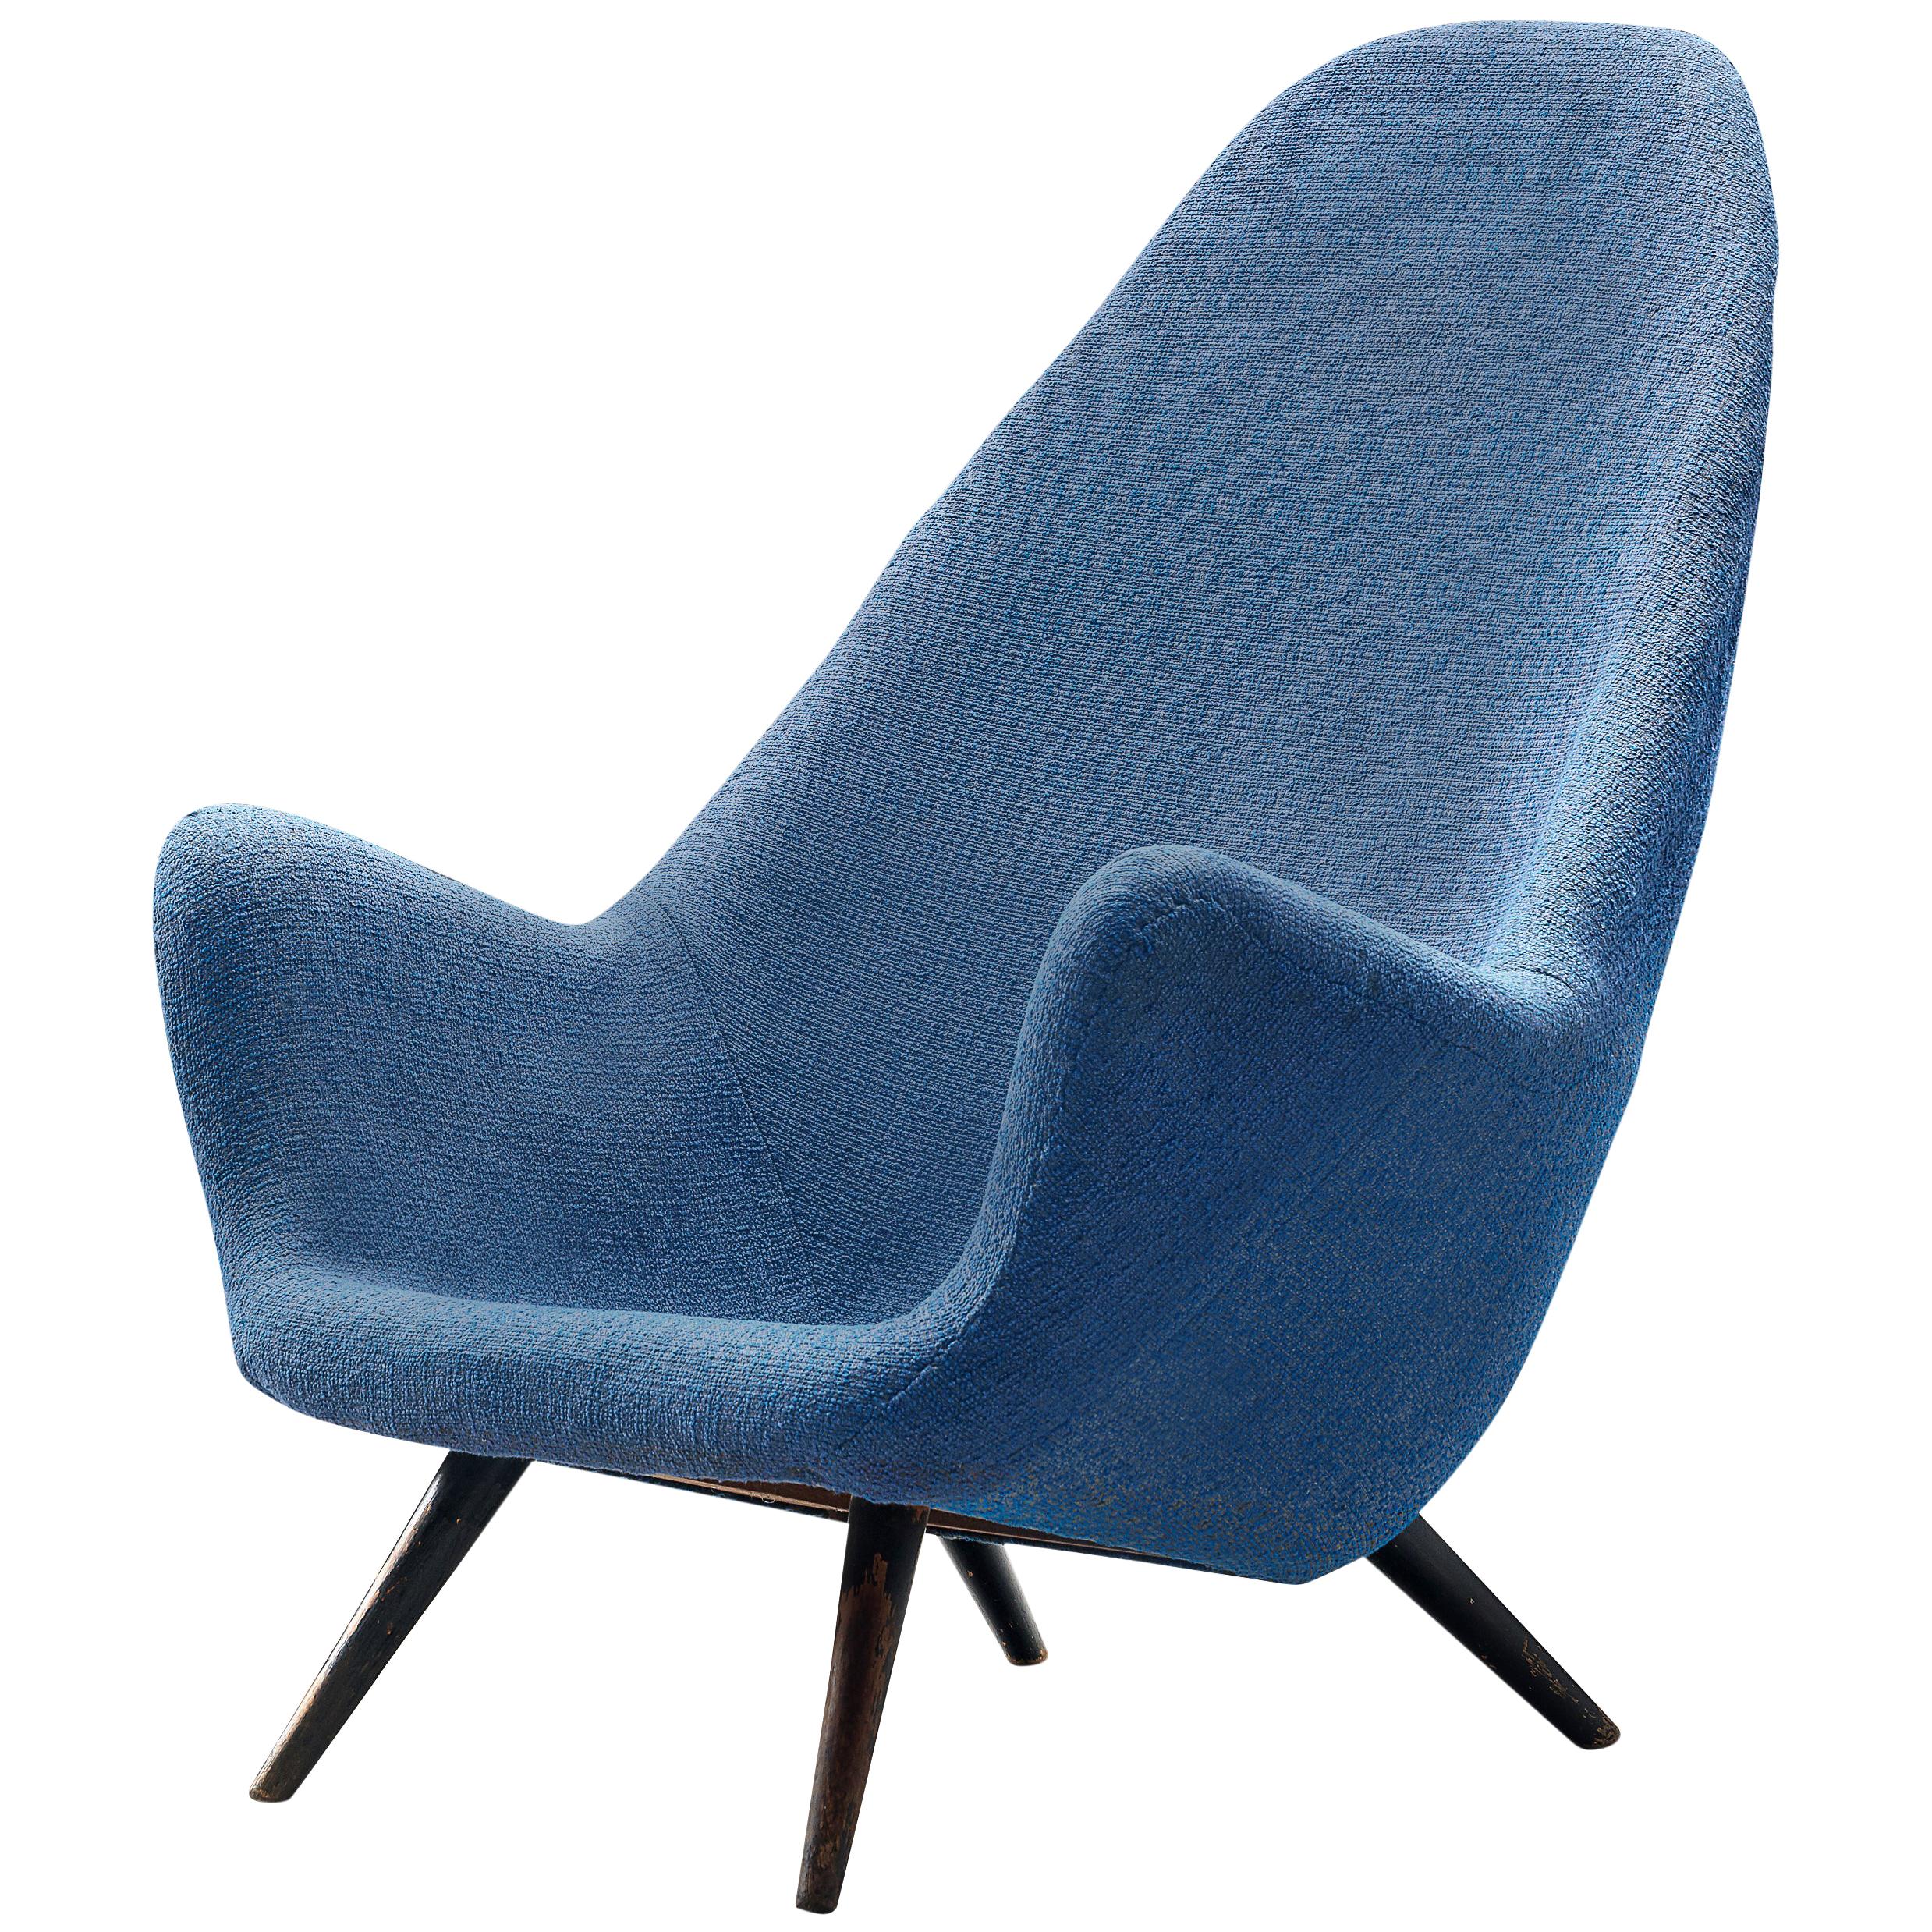 Danish Highback Lounge Chair in Organic Shape and Blue Upholstery